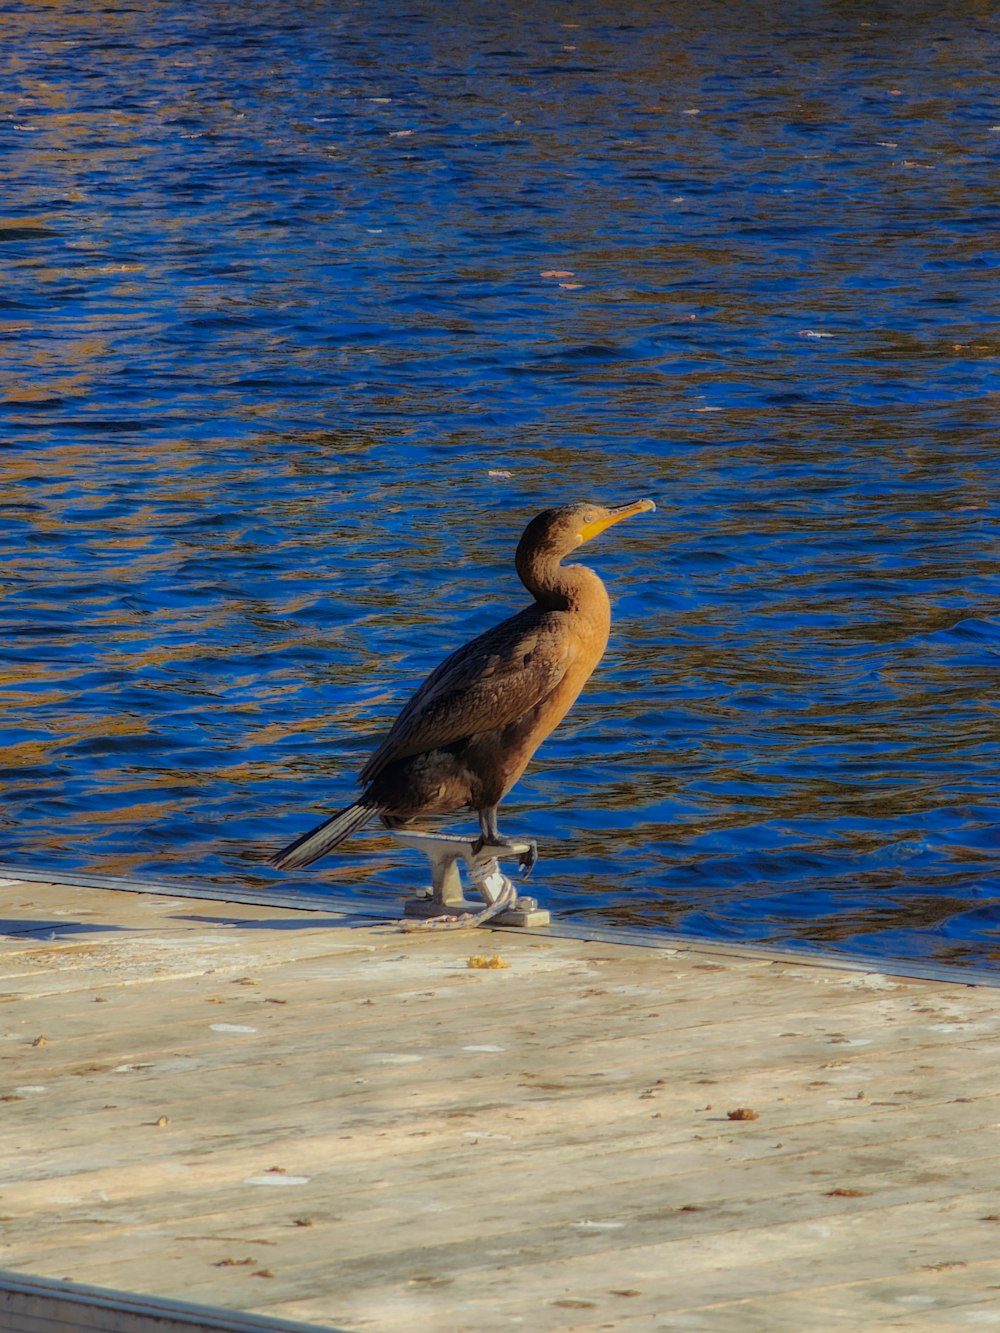 a bird standing on a dock next to a body of water